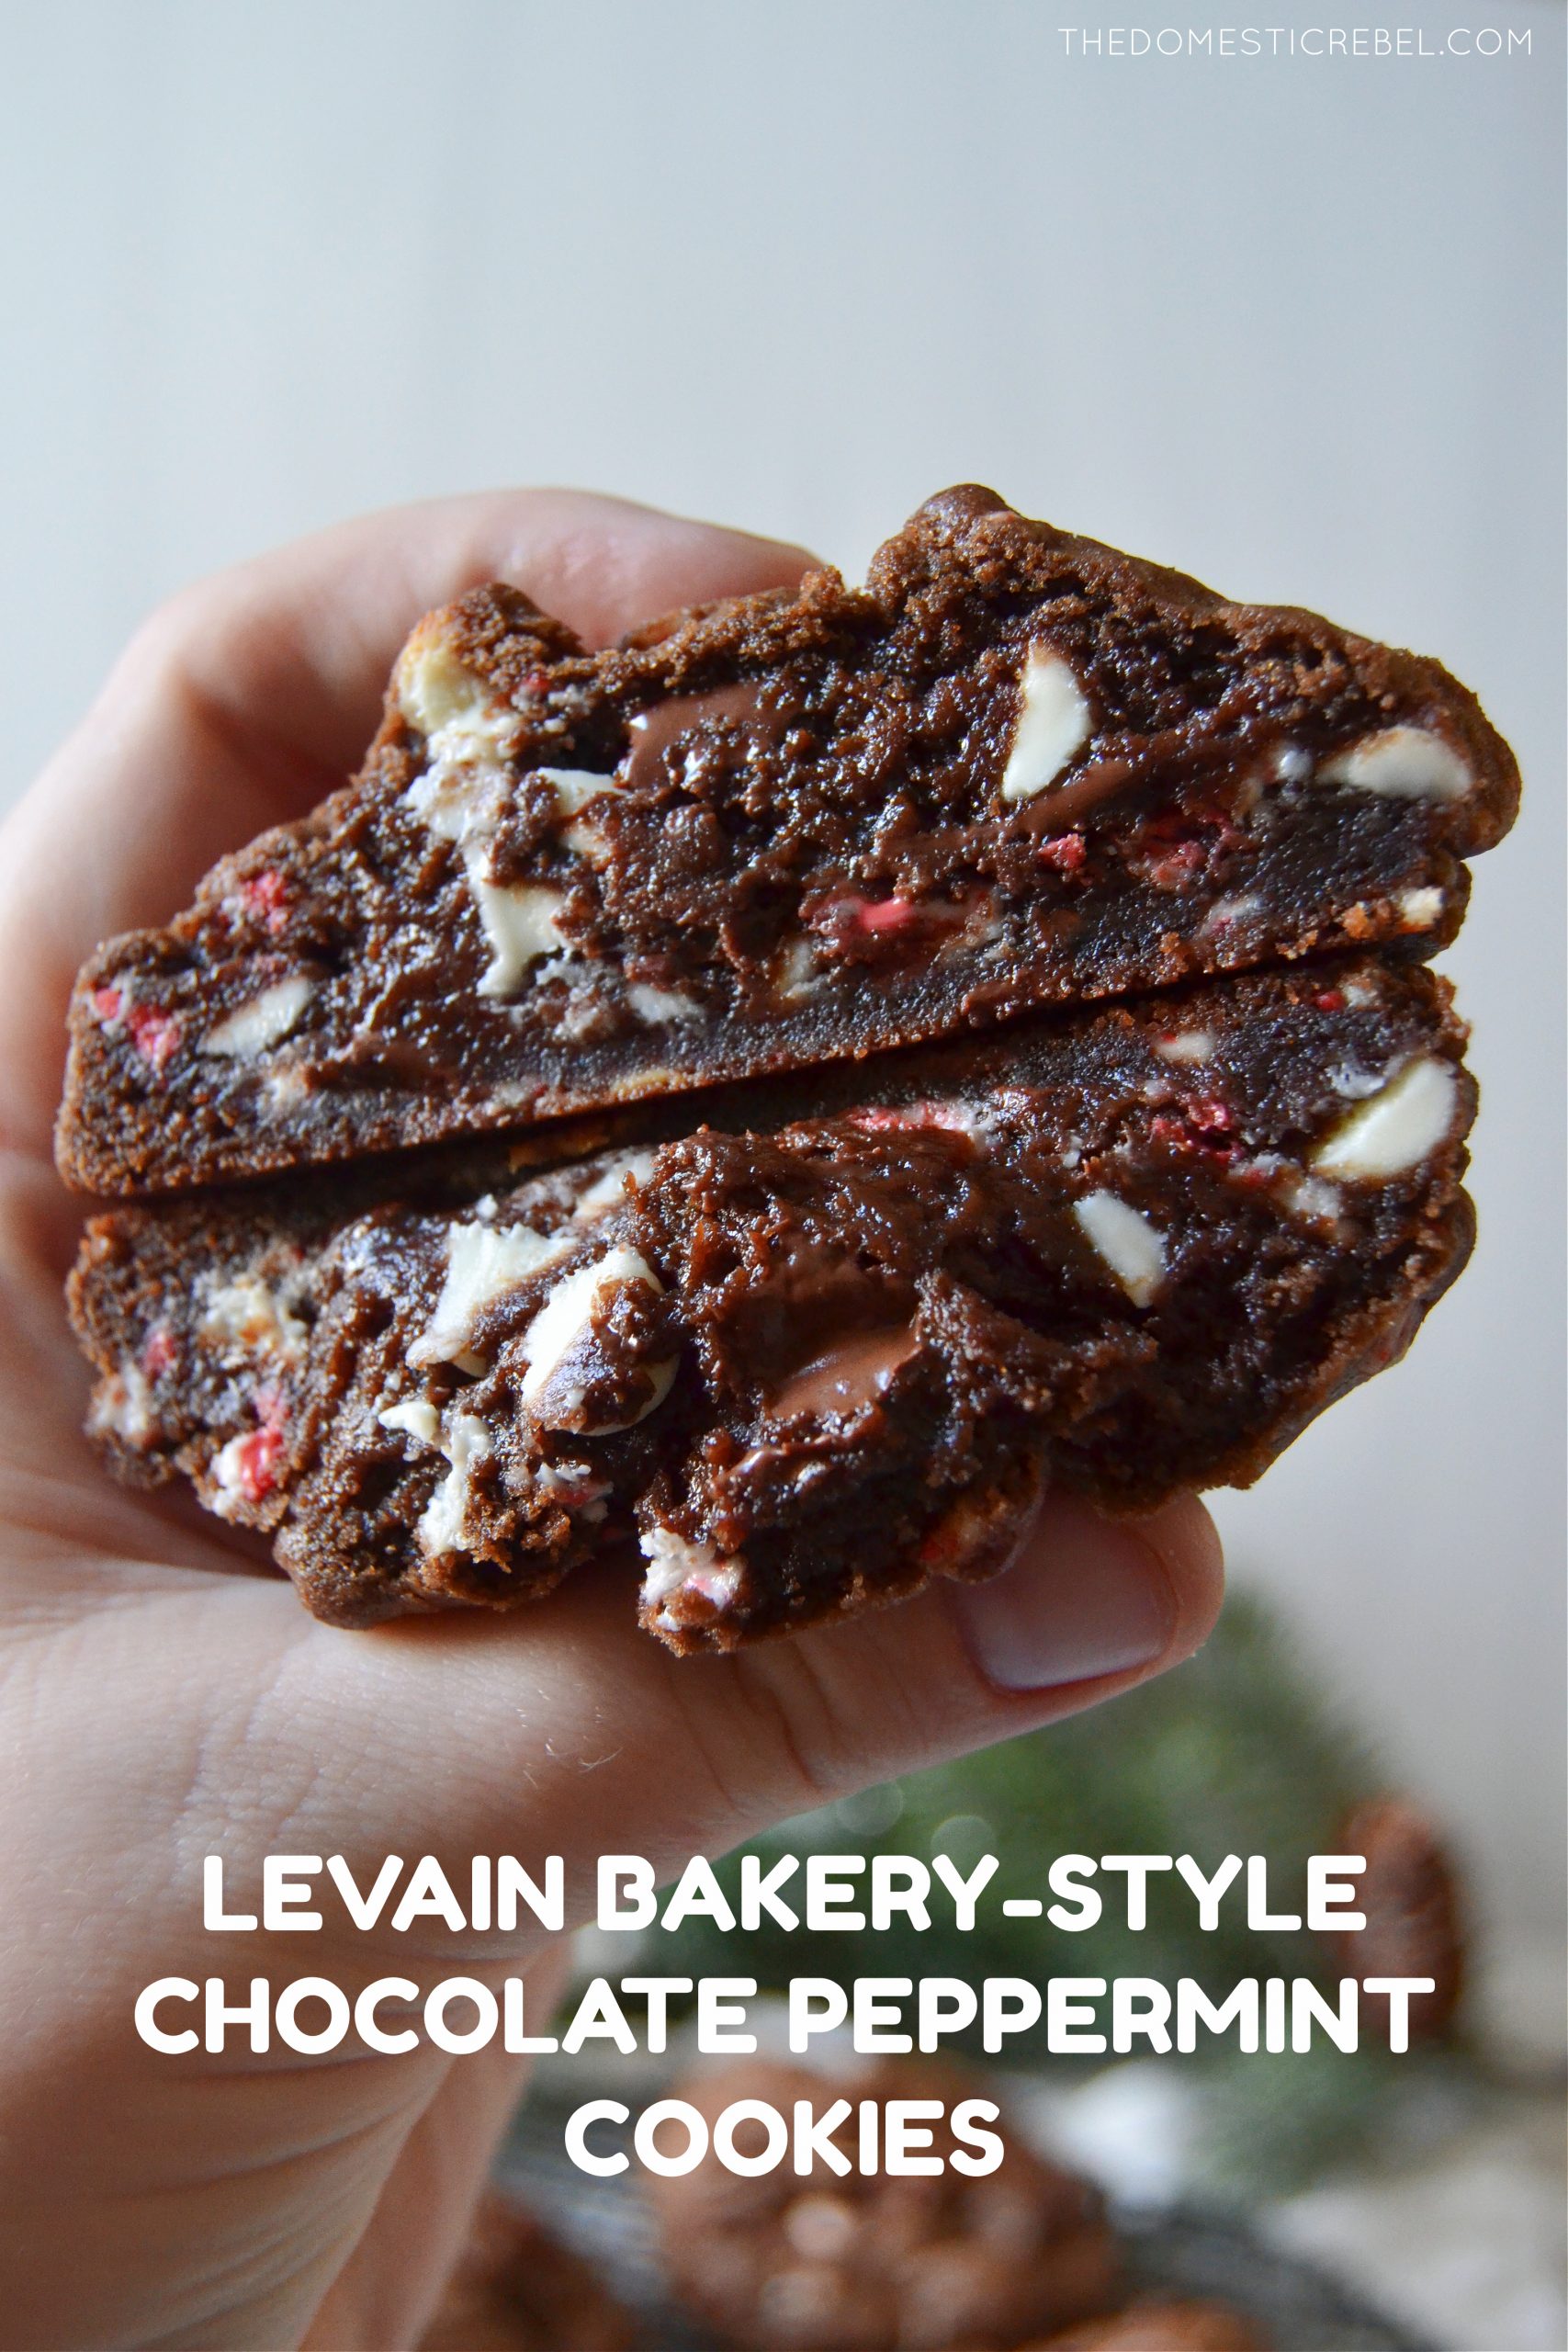 Levain Bakery-Style Chocolate Peppermint Cookies